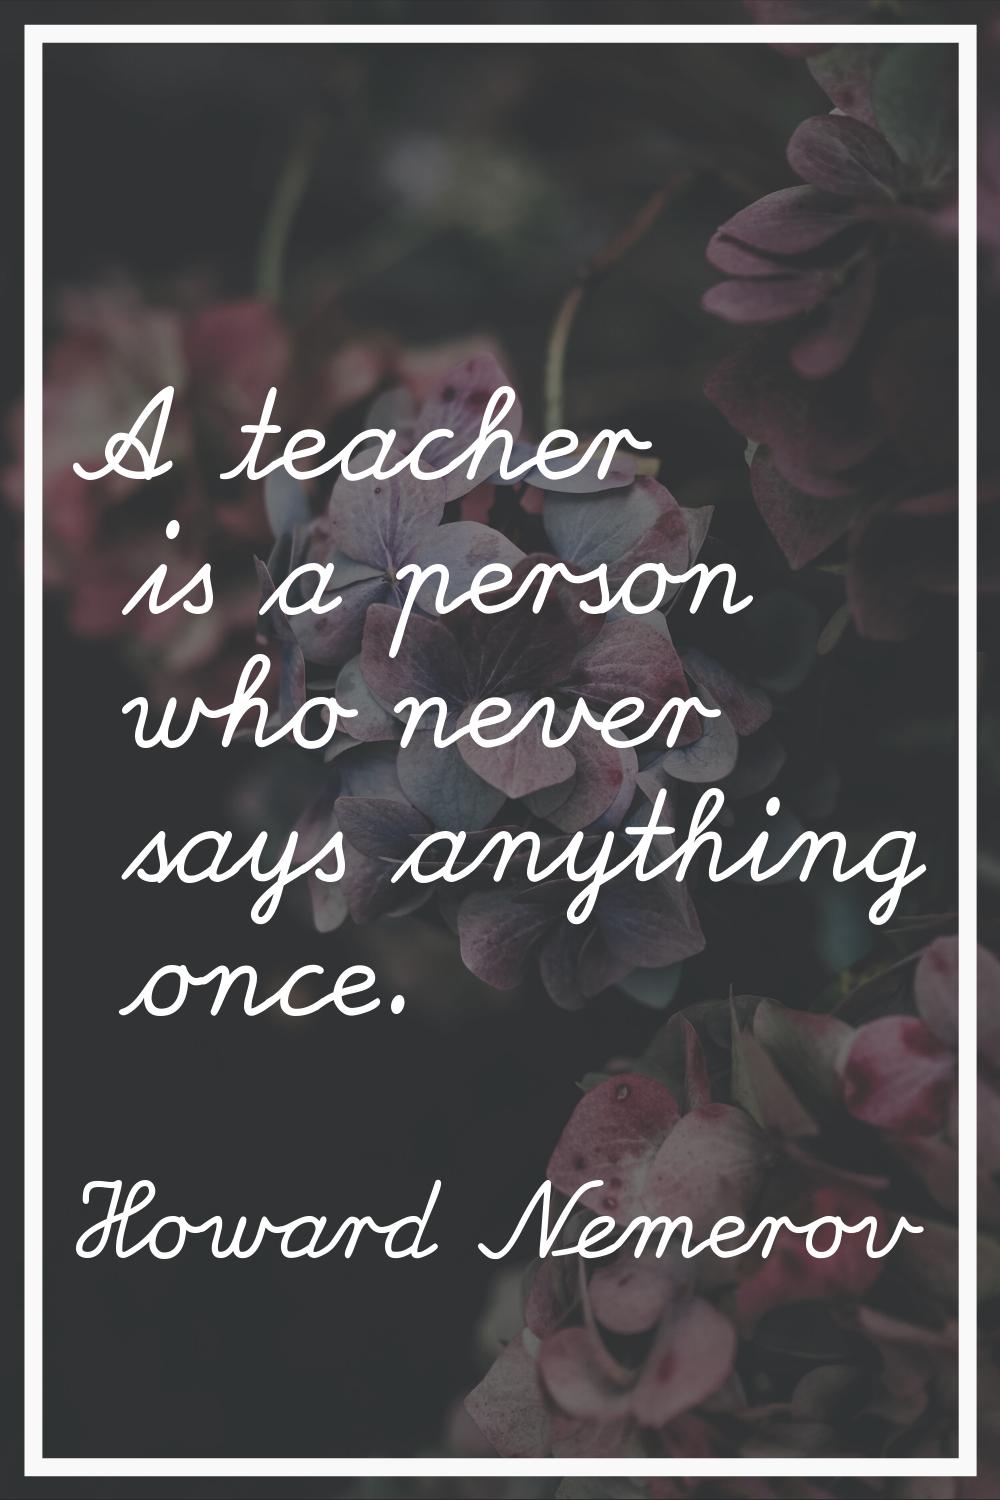 A teacher is a person who never says anything once.